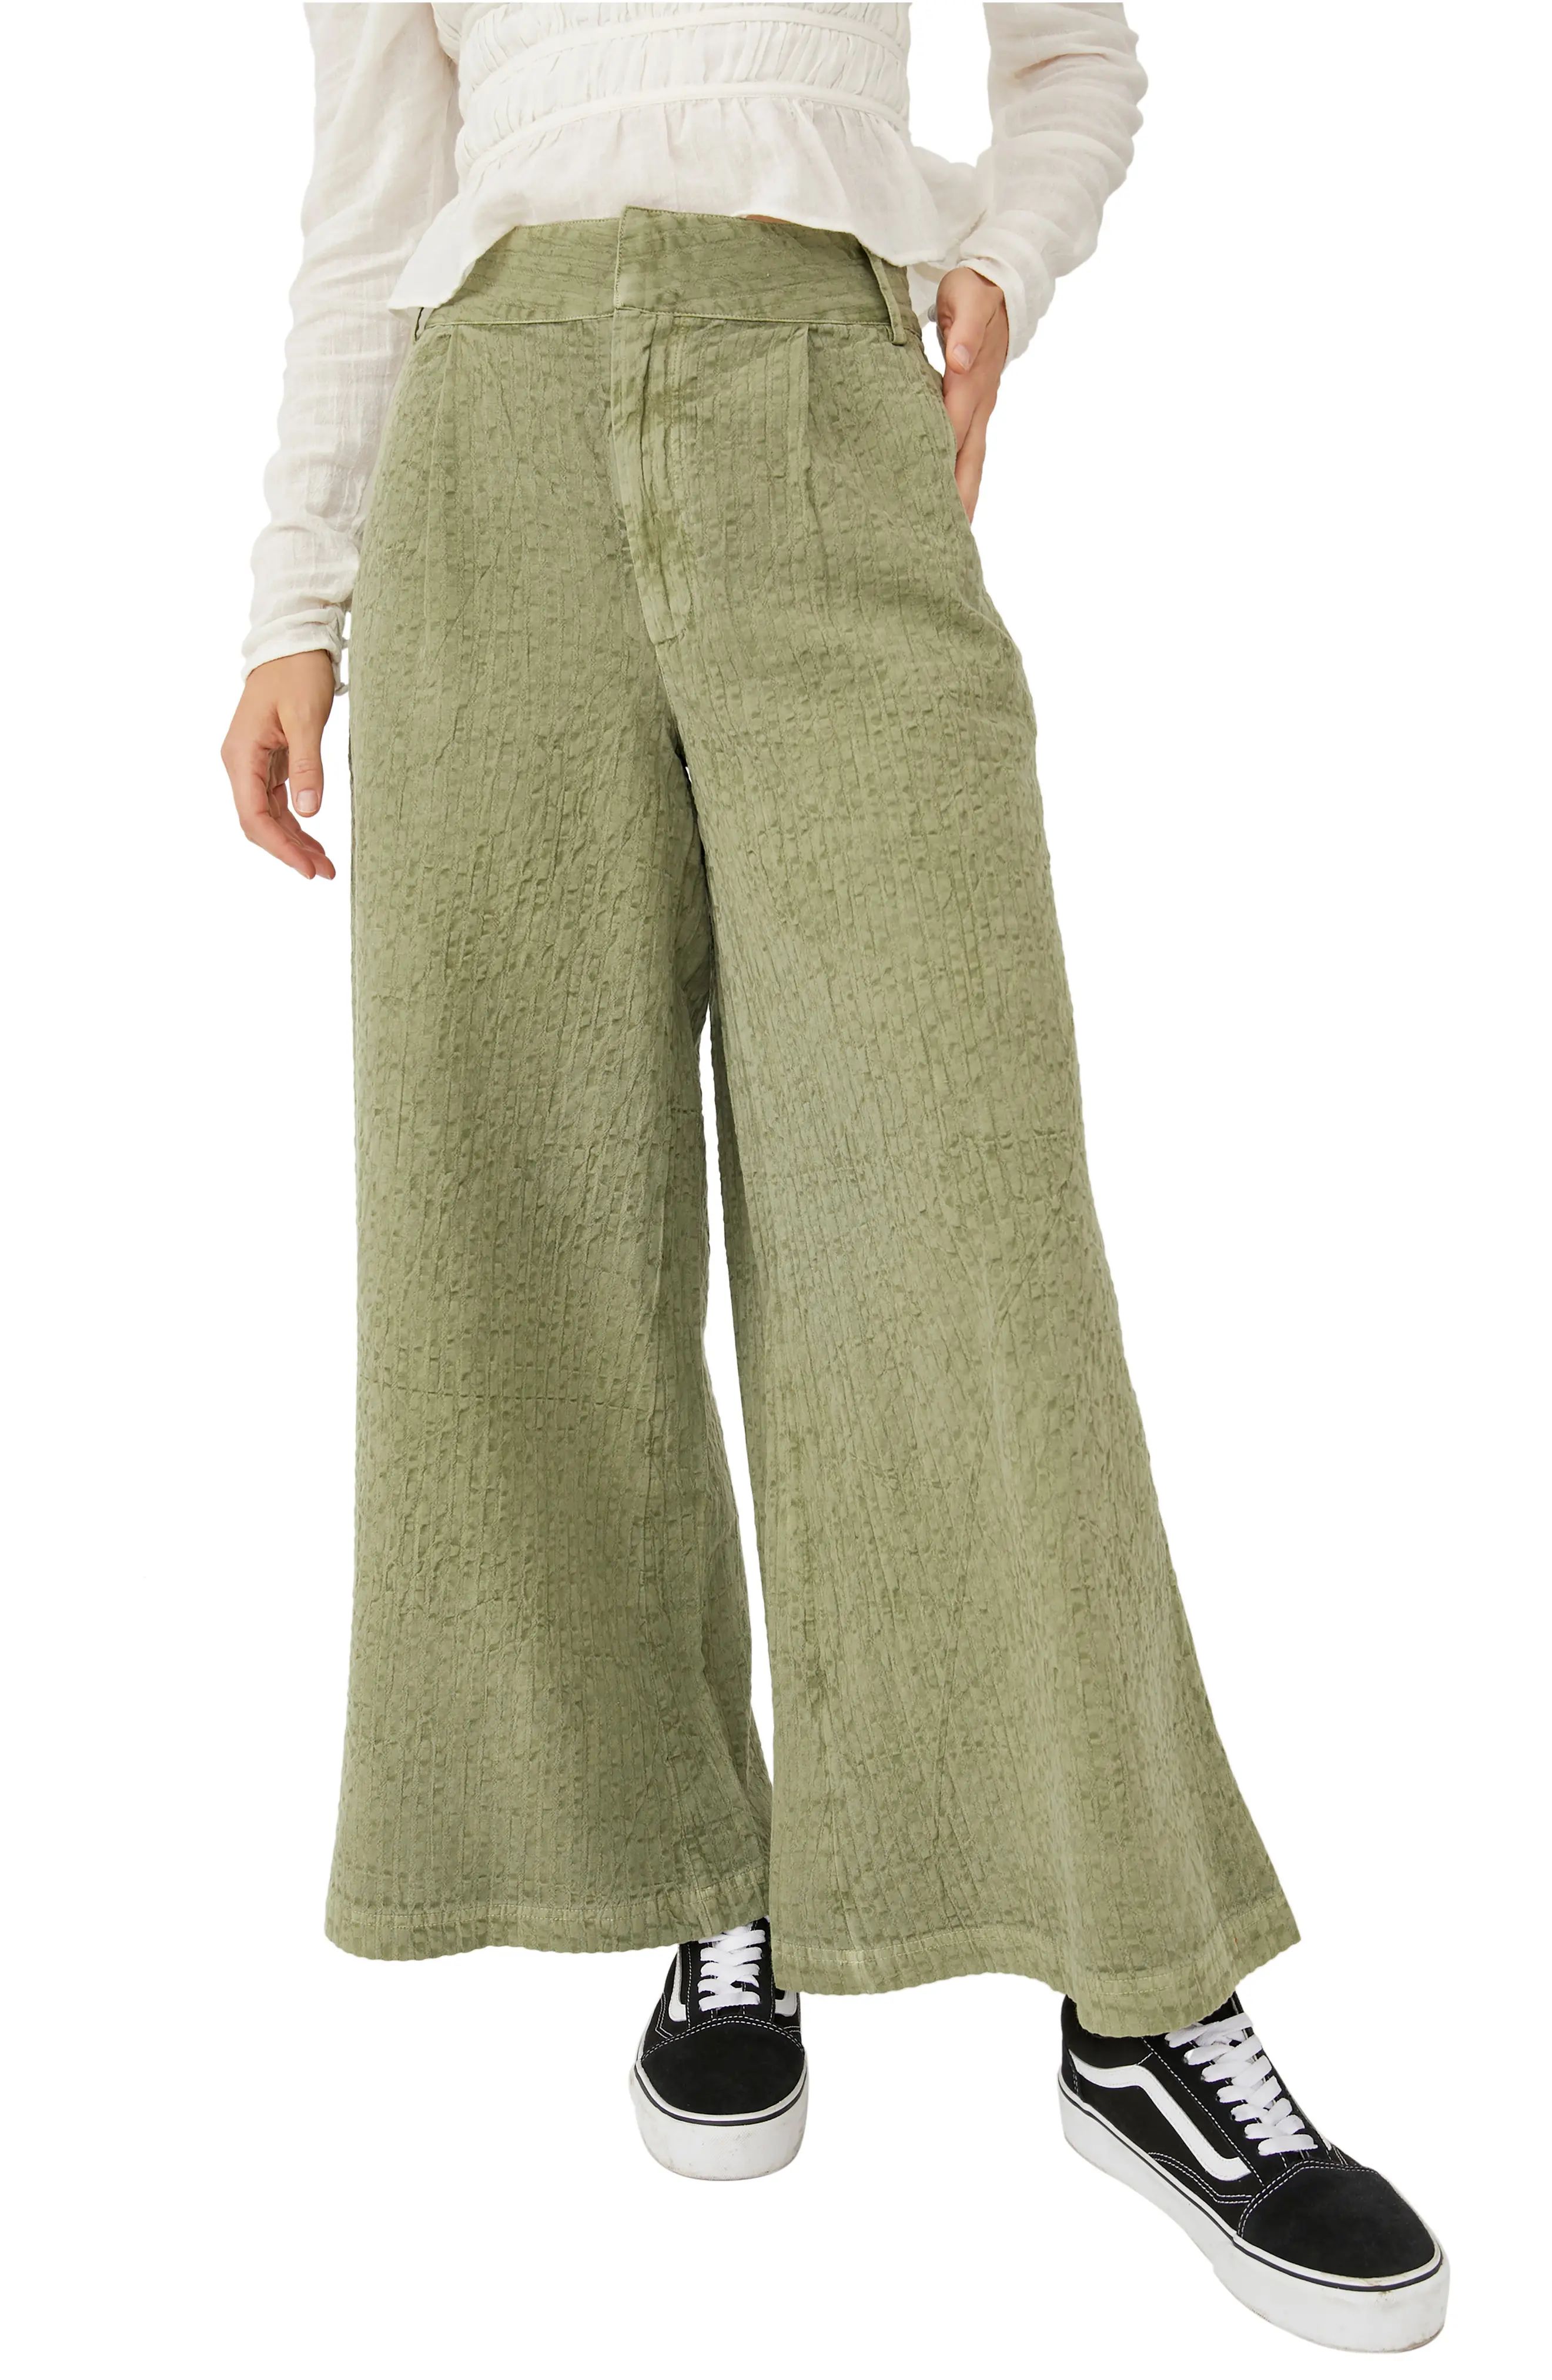 Free People Pieces of Us Cotton & Linen Wide Leg Trousers in Dried Herb at Nordstrom, Size 10 | Nordstrom